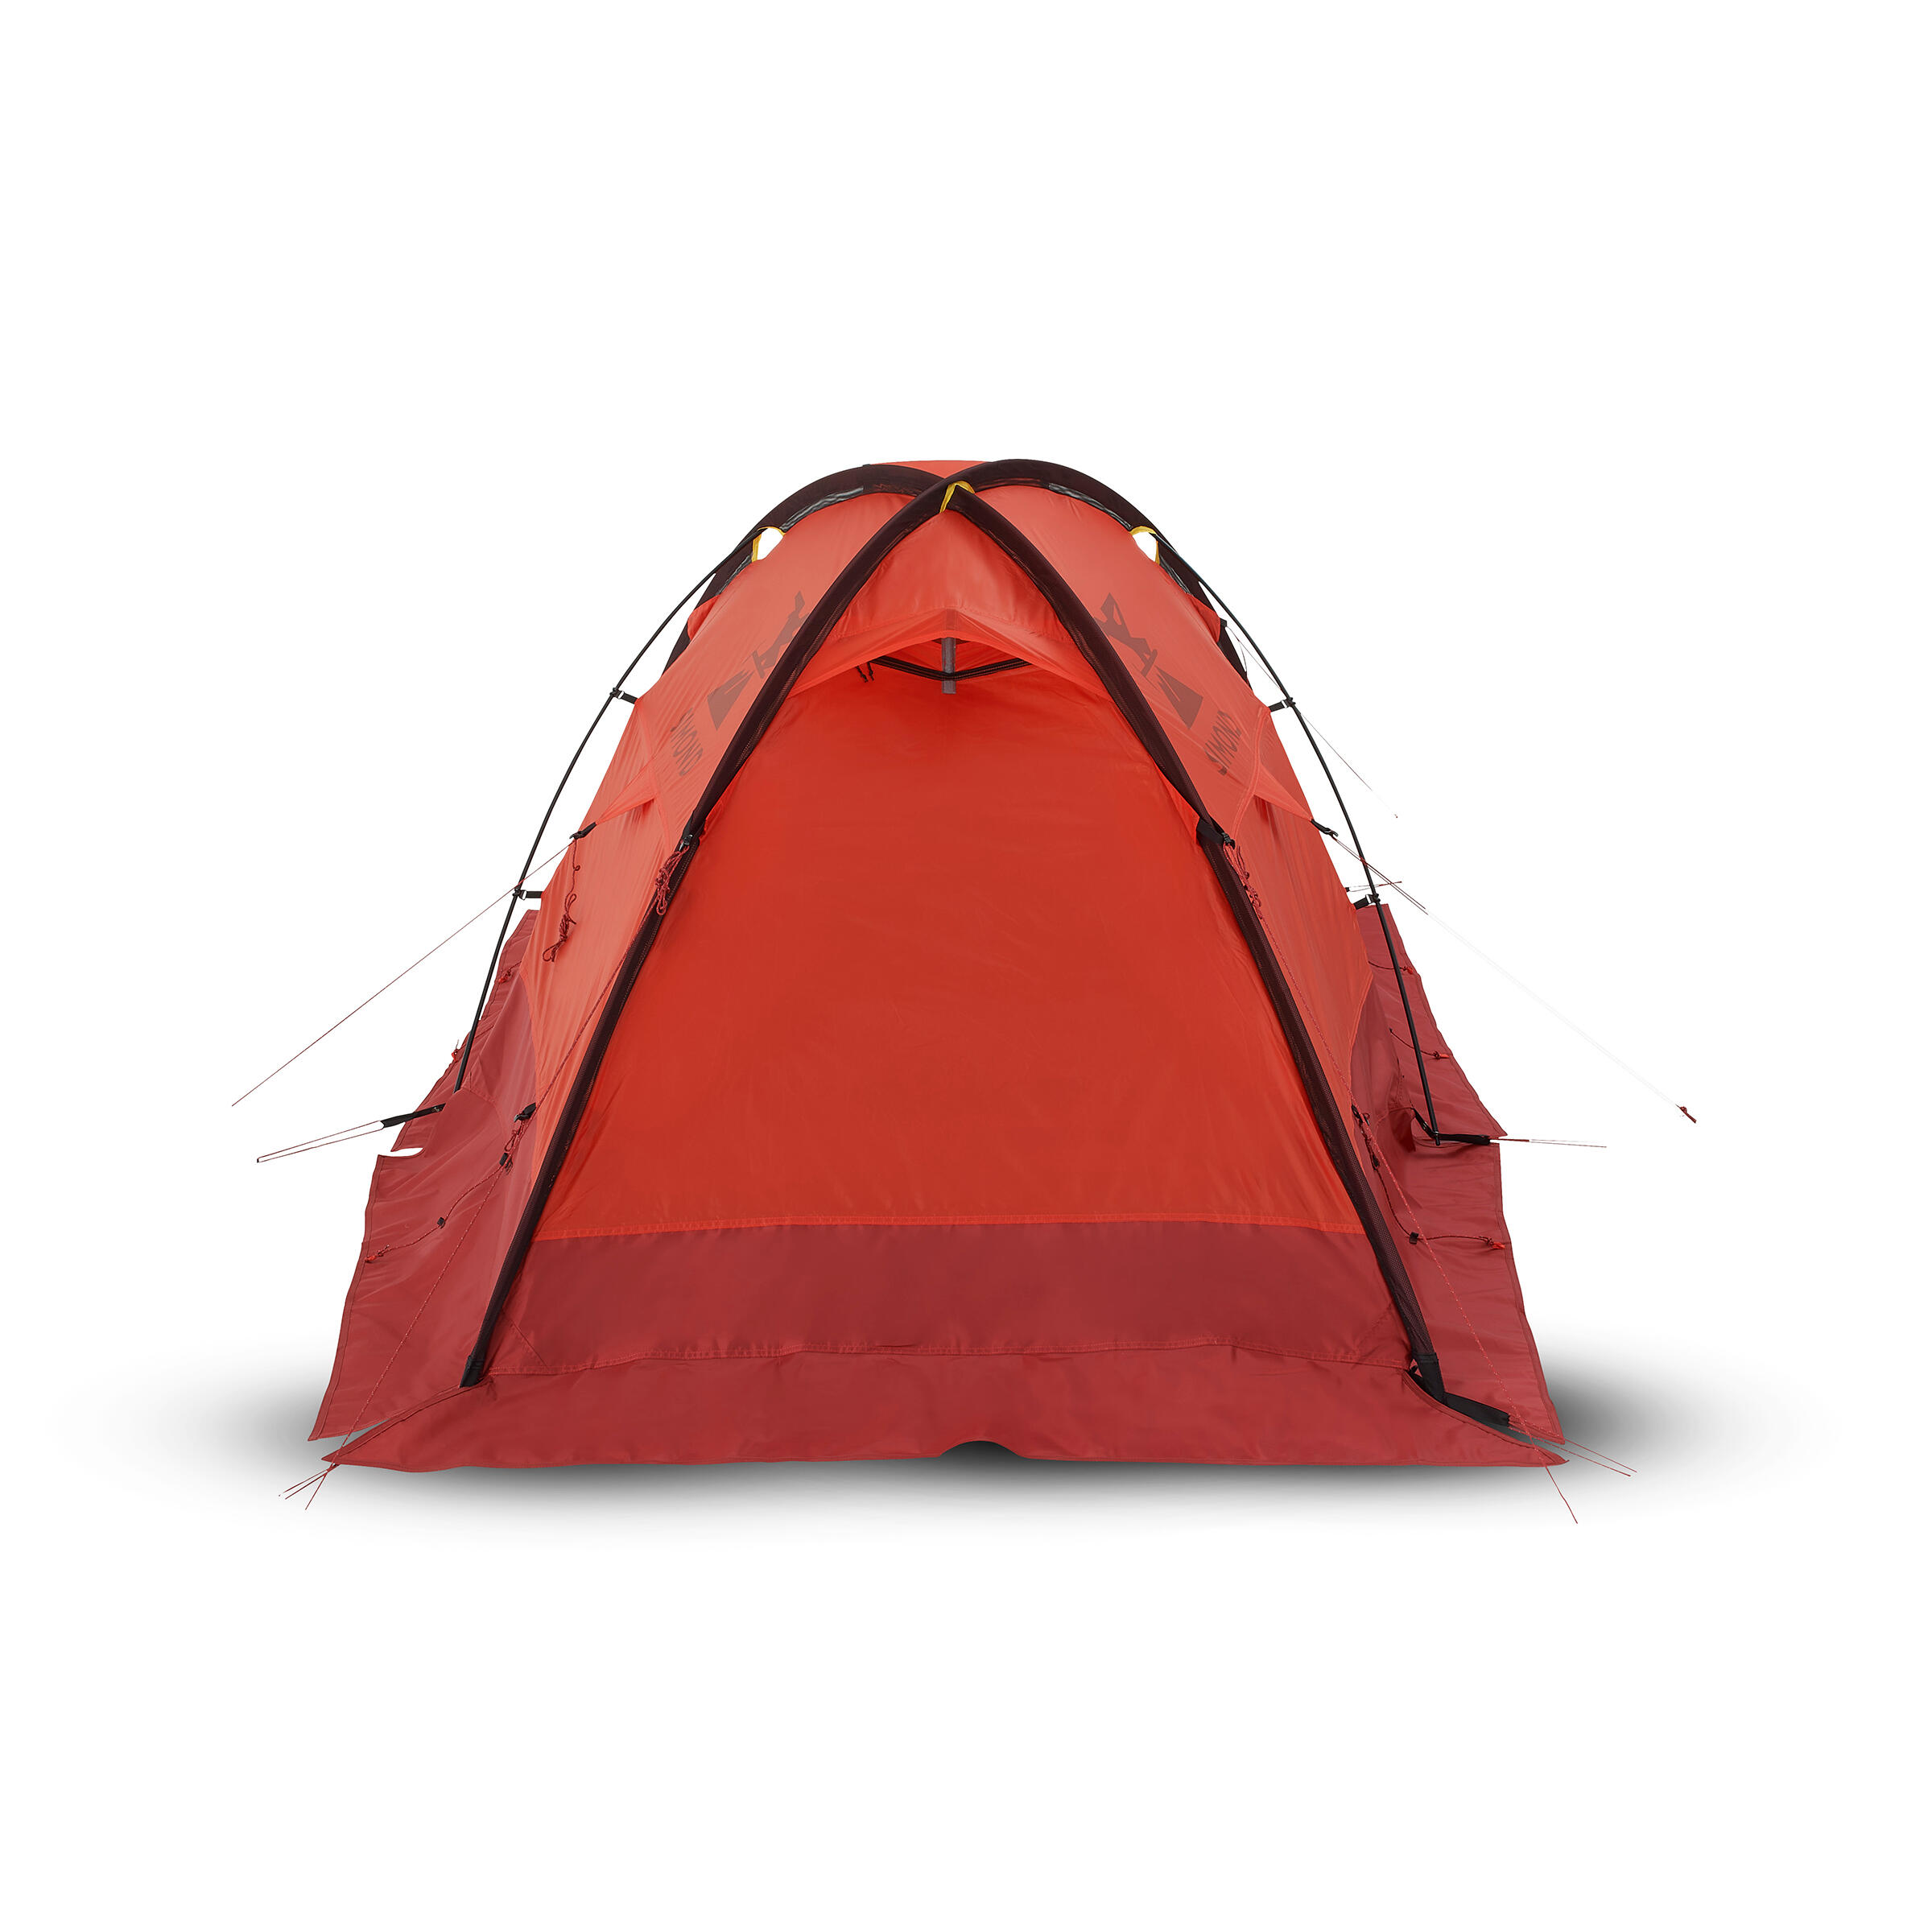 2-person mountaineering tent - Makalu T2 3/14